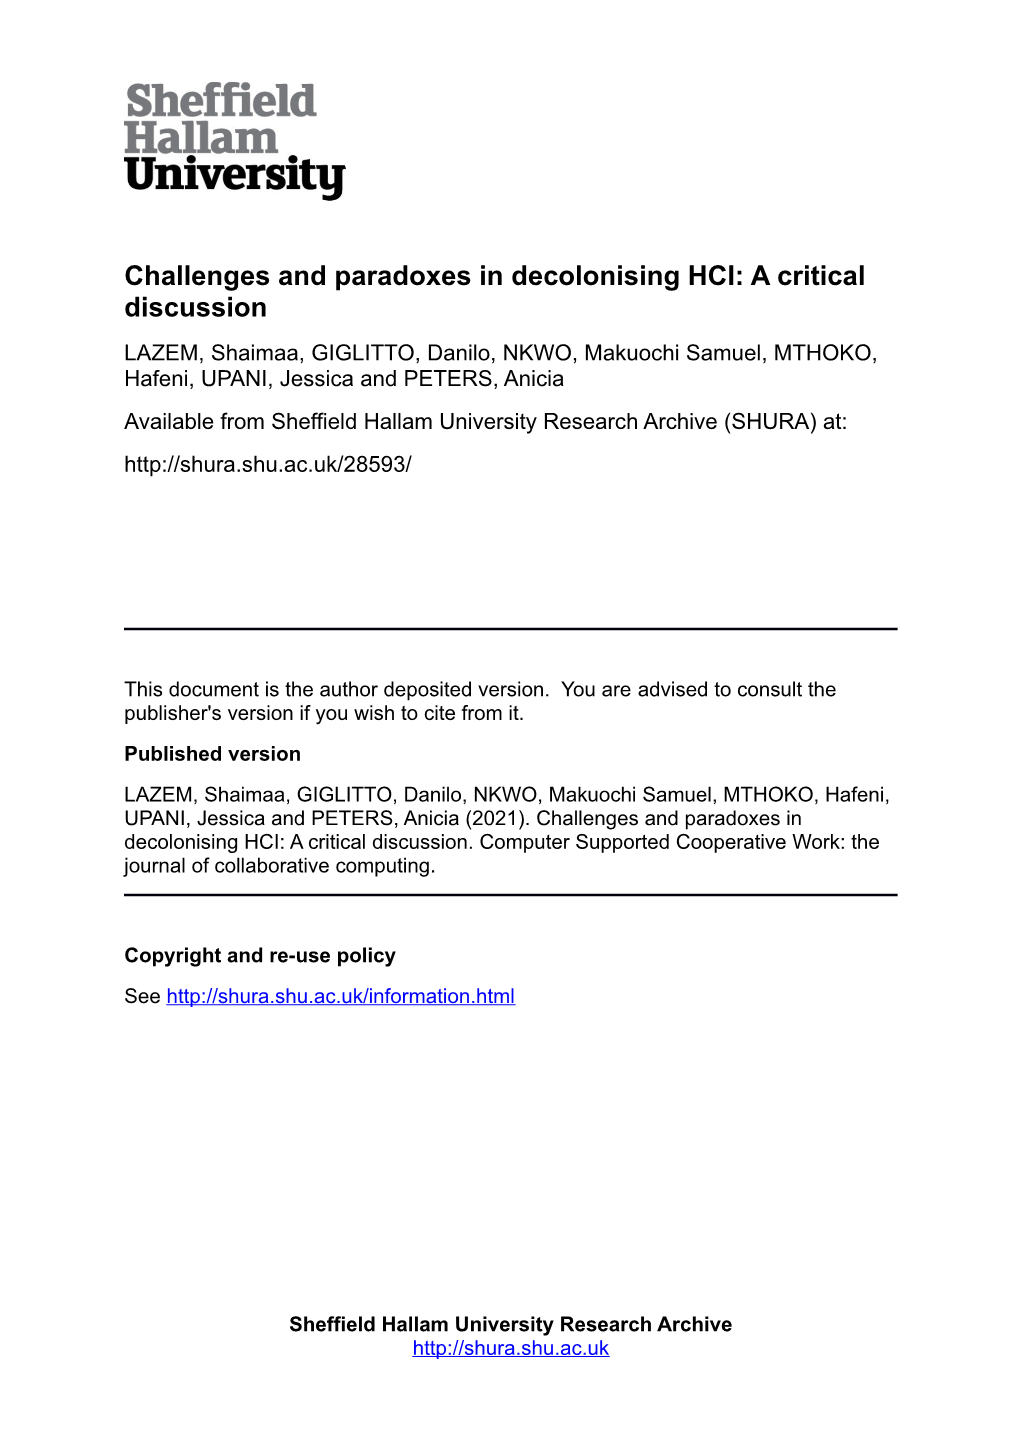 Challenges and Paradoxes in Decolonising